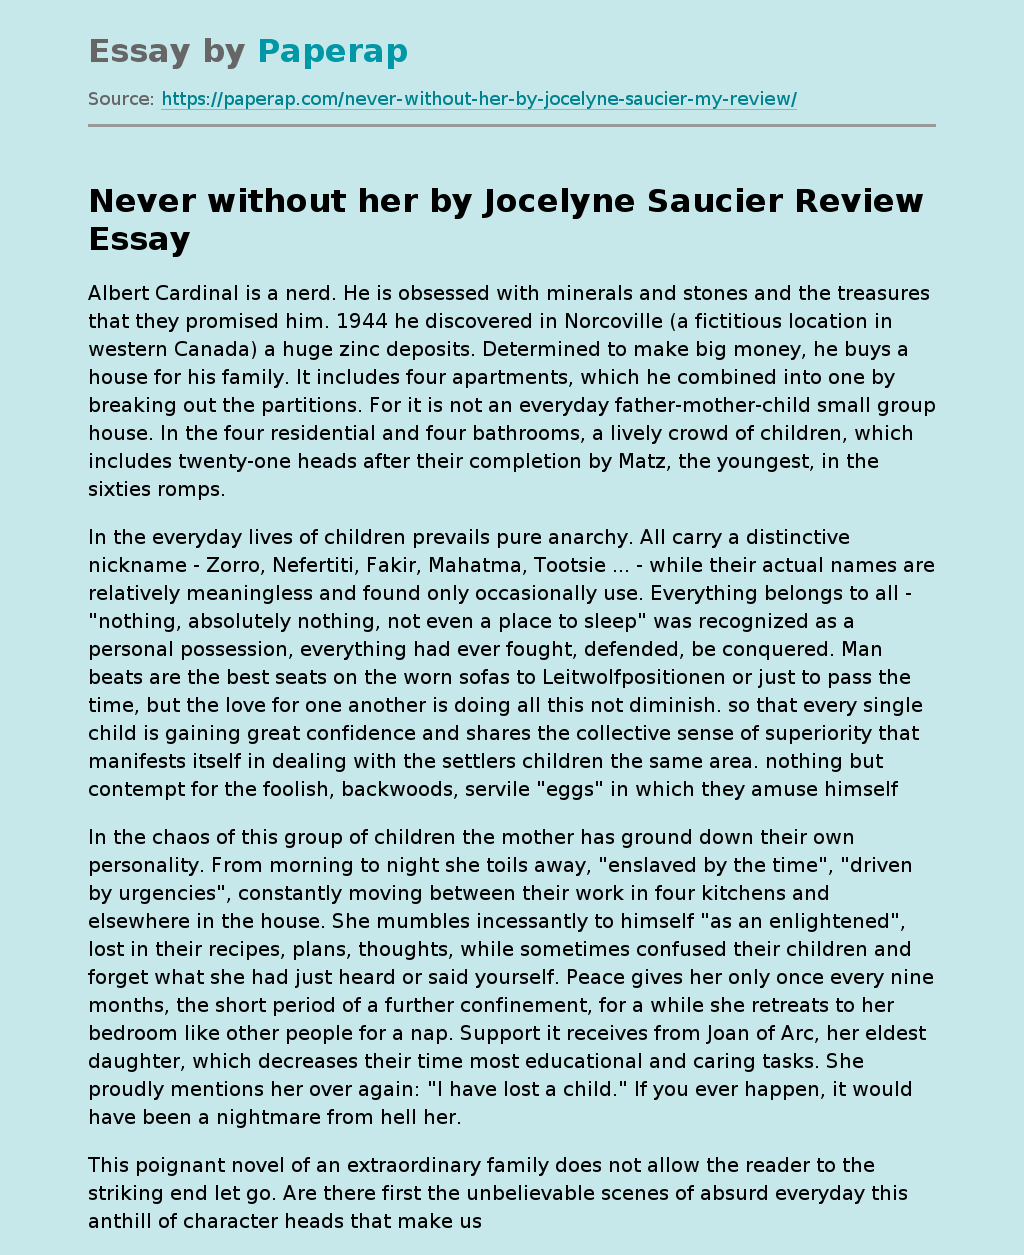 Never without her by Jocelyne Saucier Review